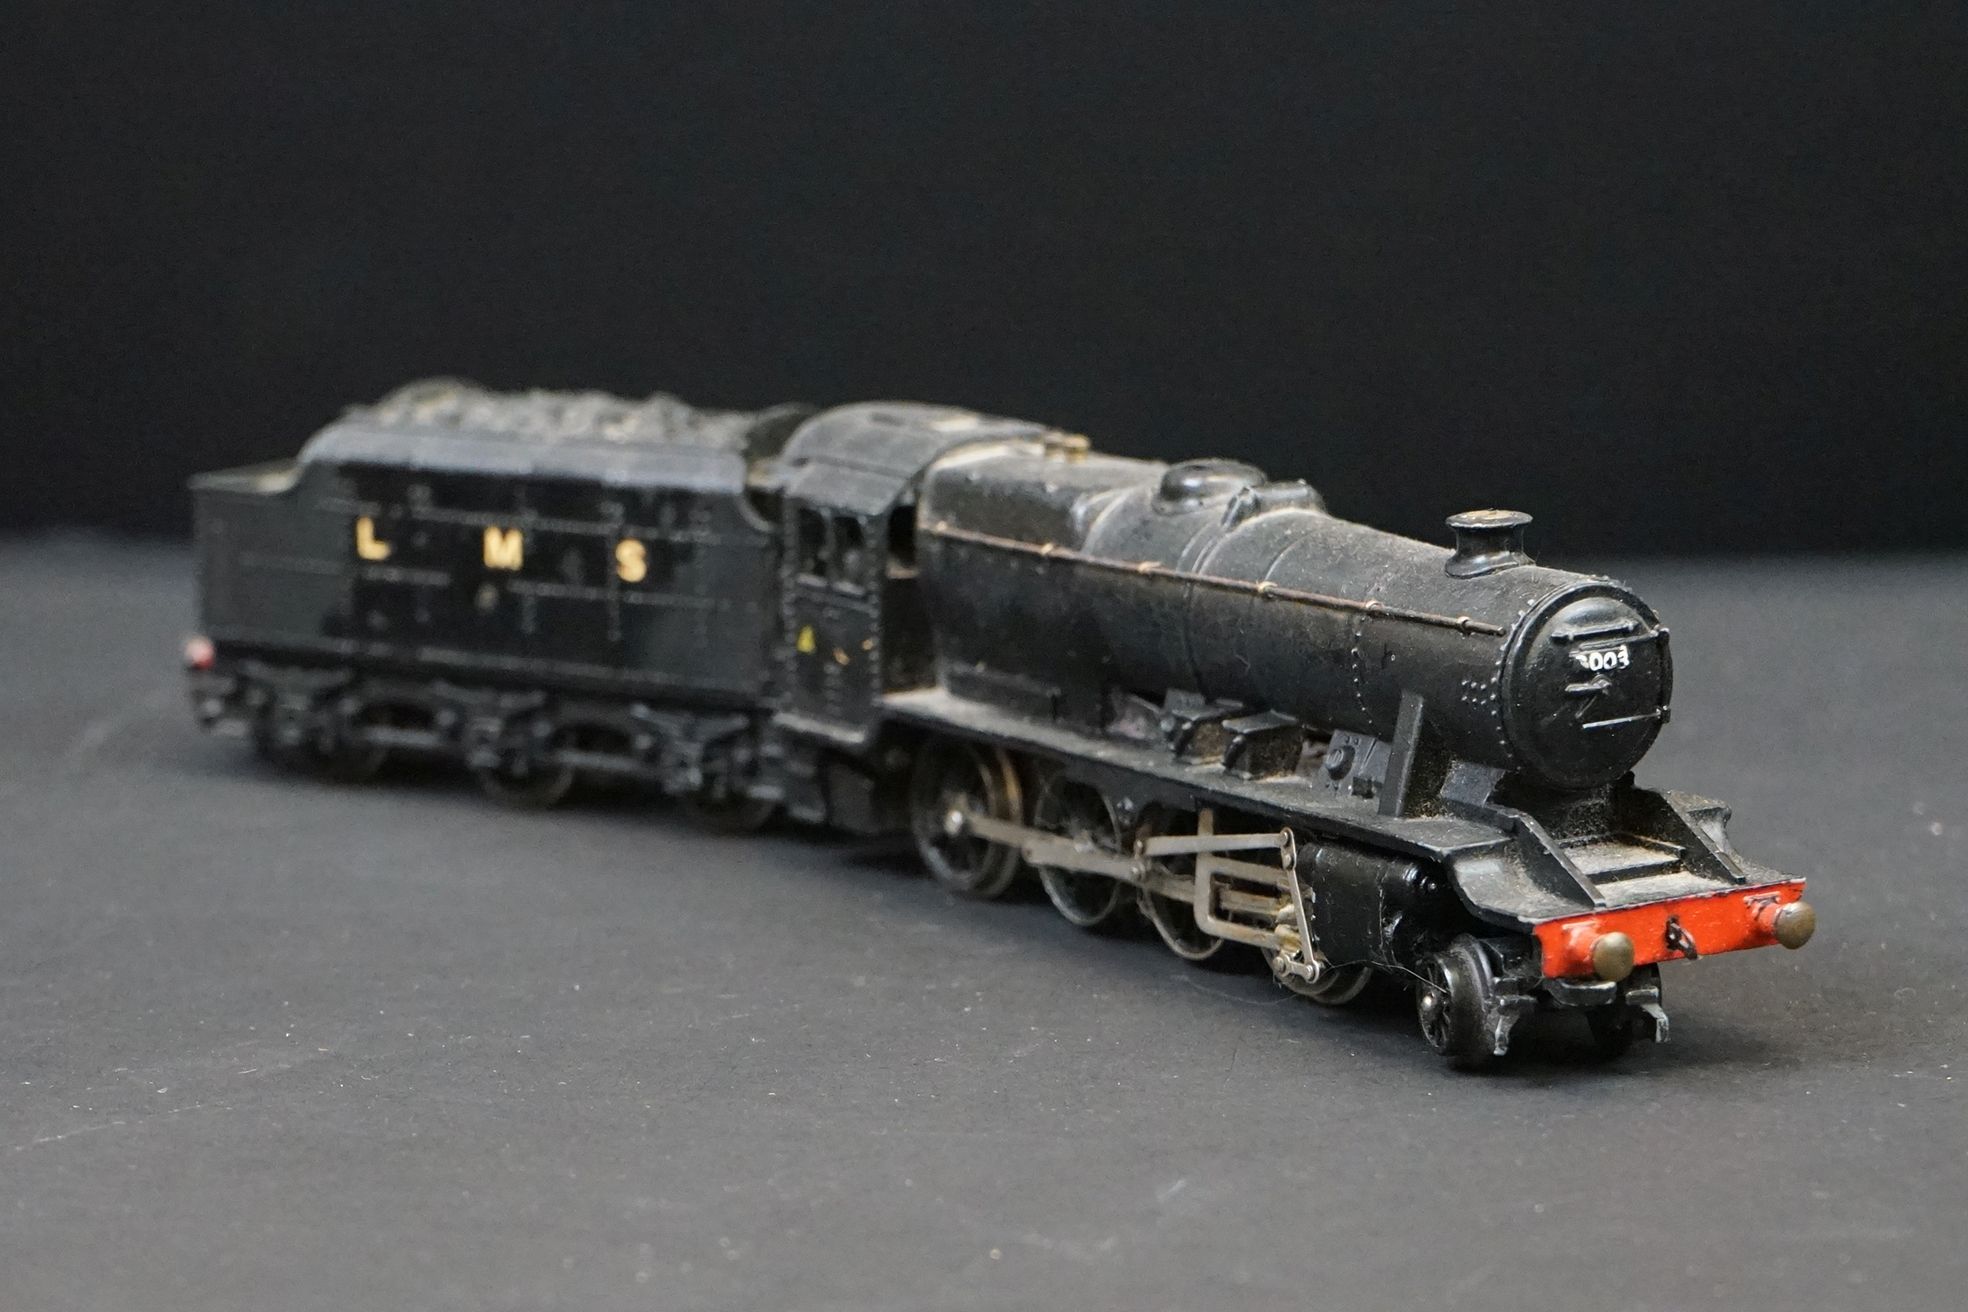 13 OO gauge locomotives to include Hornby, Lima & Airfix featuring Hornby Dublo 2-8-0LMS in black, - Image 10 of 12